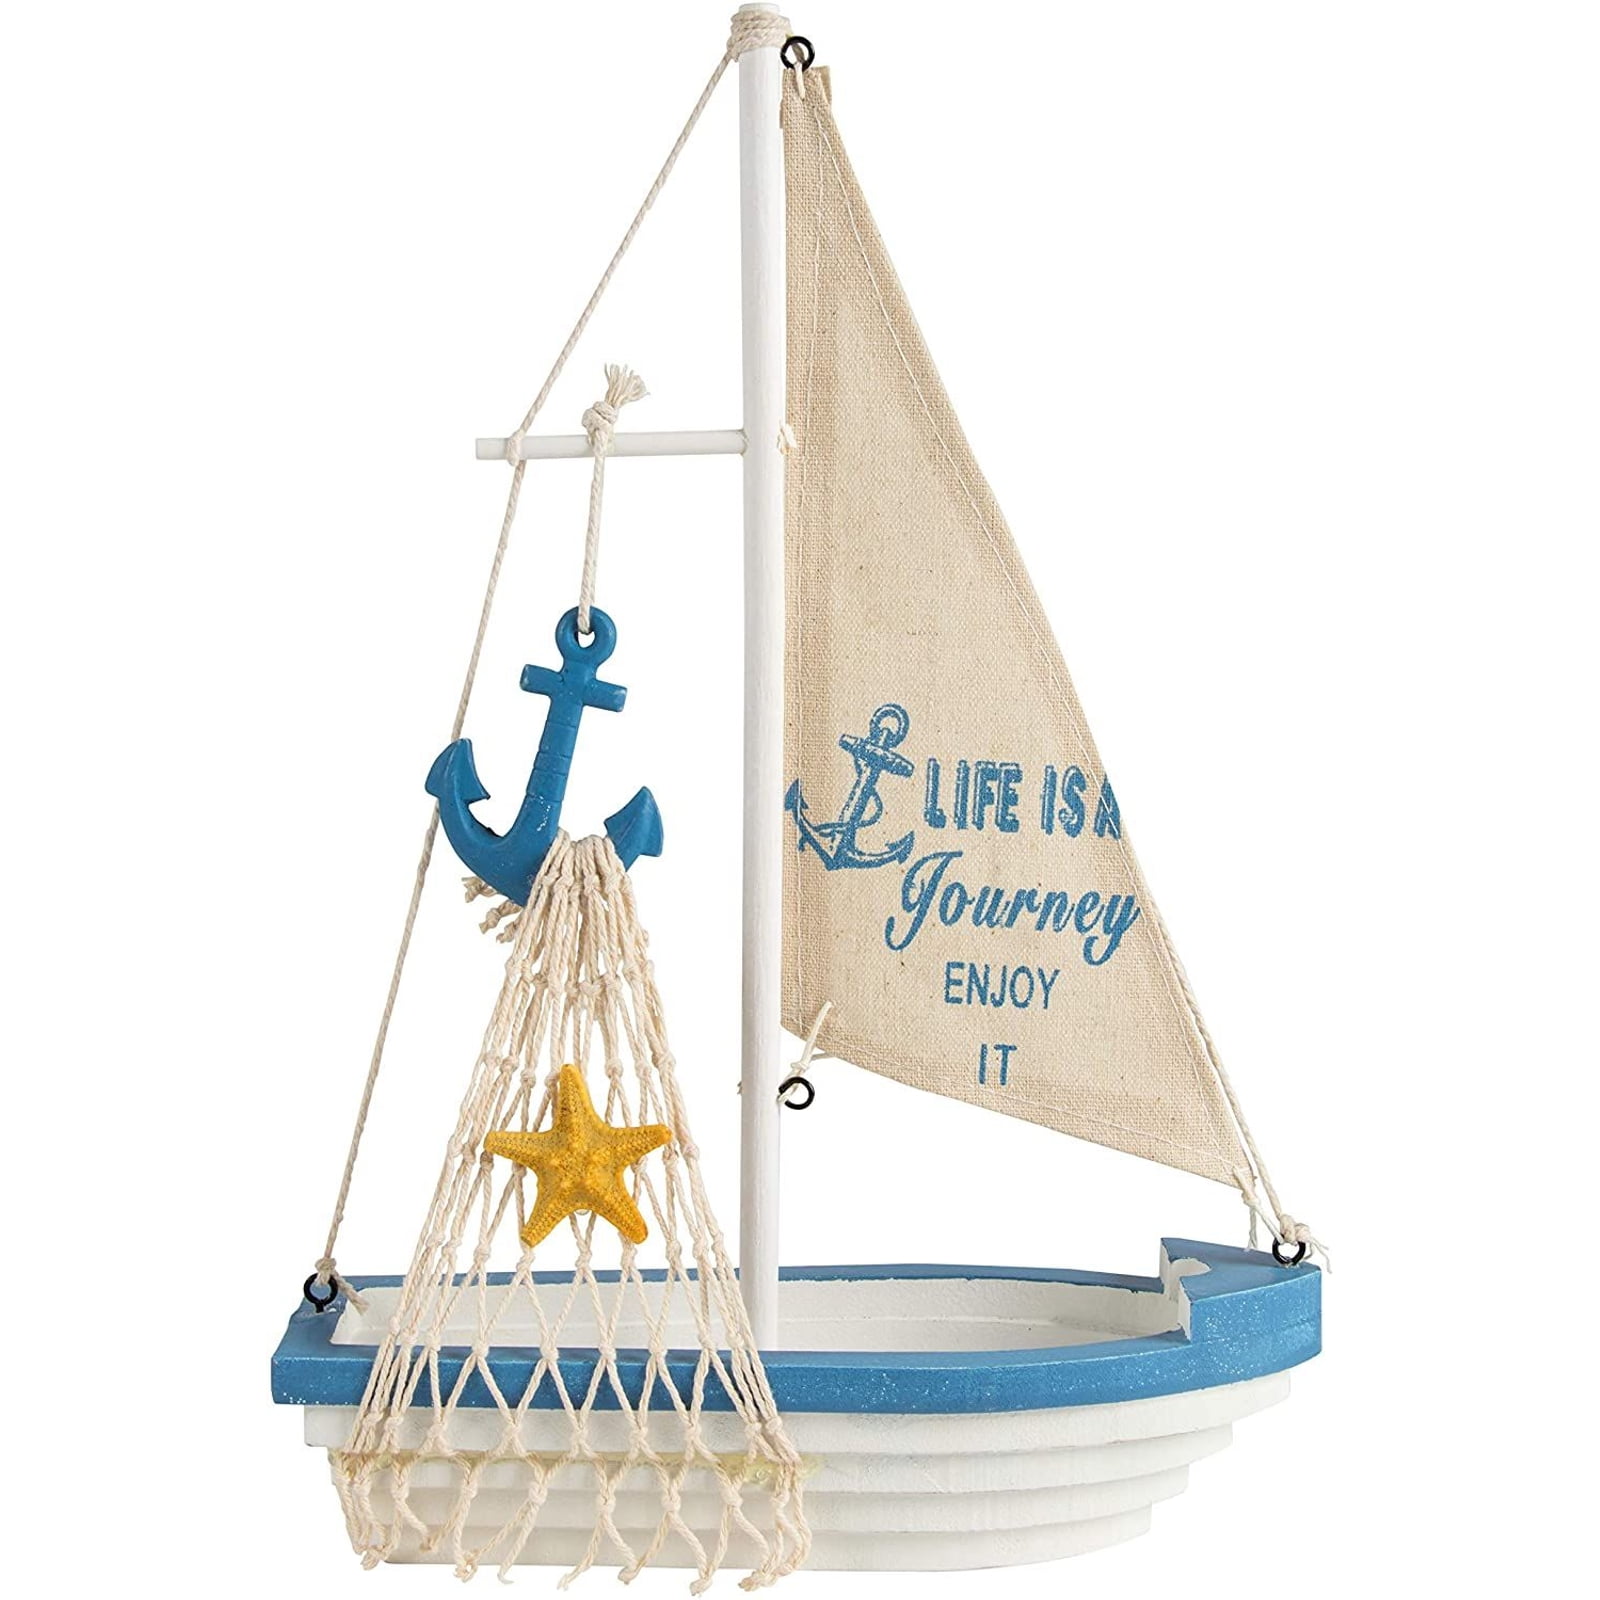 Mediterranean Sailboat Model Sailboat Model Decoration Anchor Wooden Craft for Family Friends